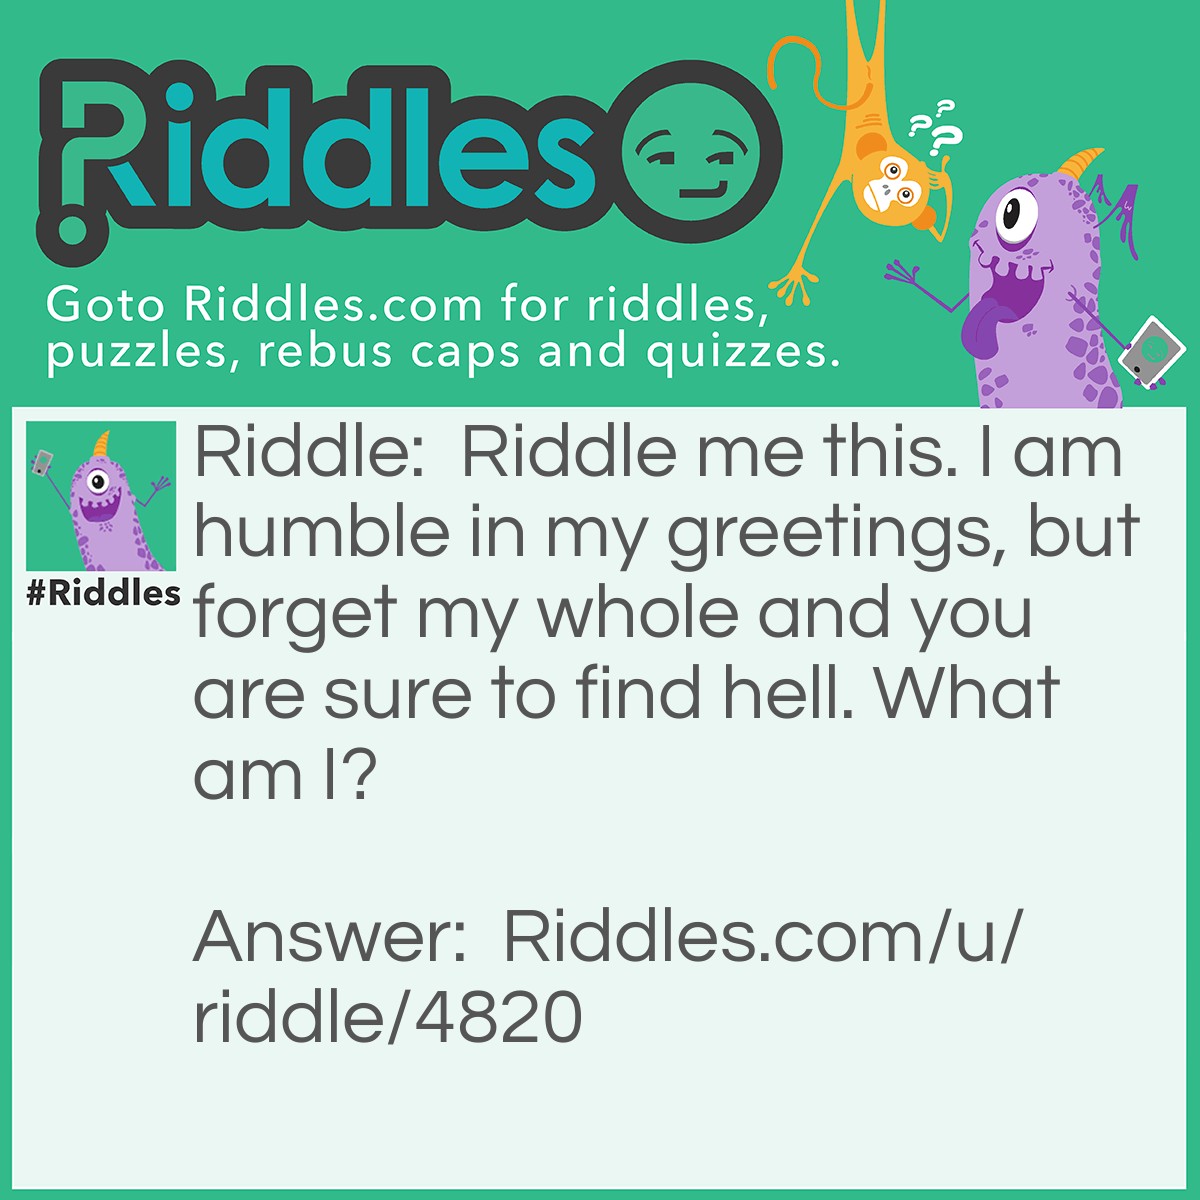 Riddle: <a href="https://www.riddles.com/2850">Riddle me this</a>. I am humble in my greetings, but forget my whole and you are sure to find hell. What am I? Answer: Hello.